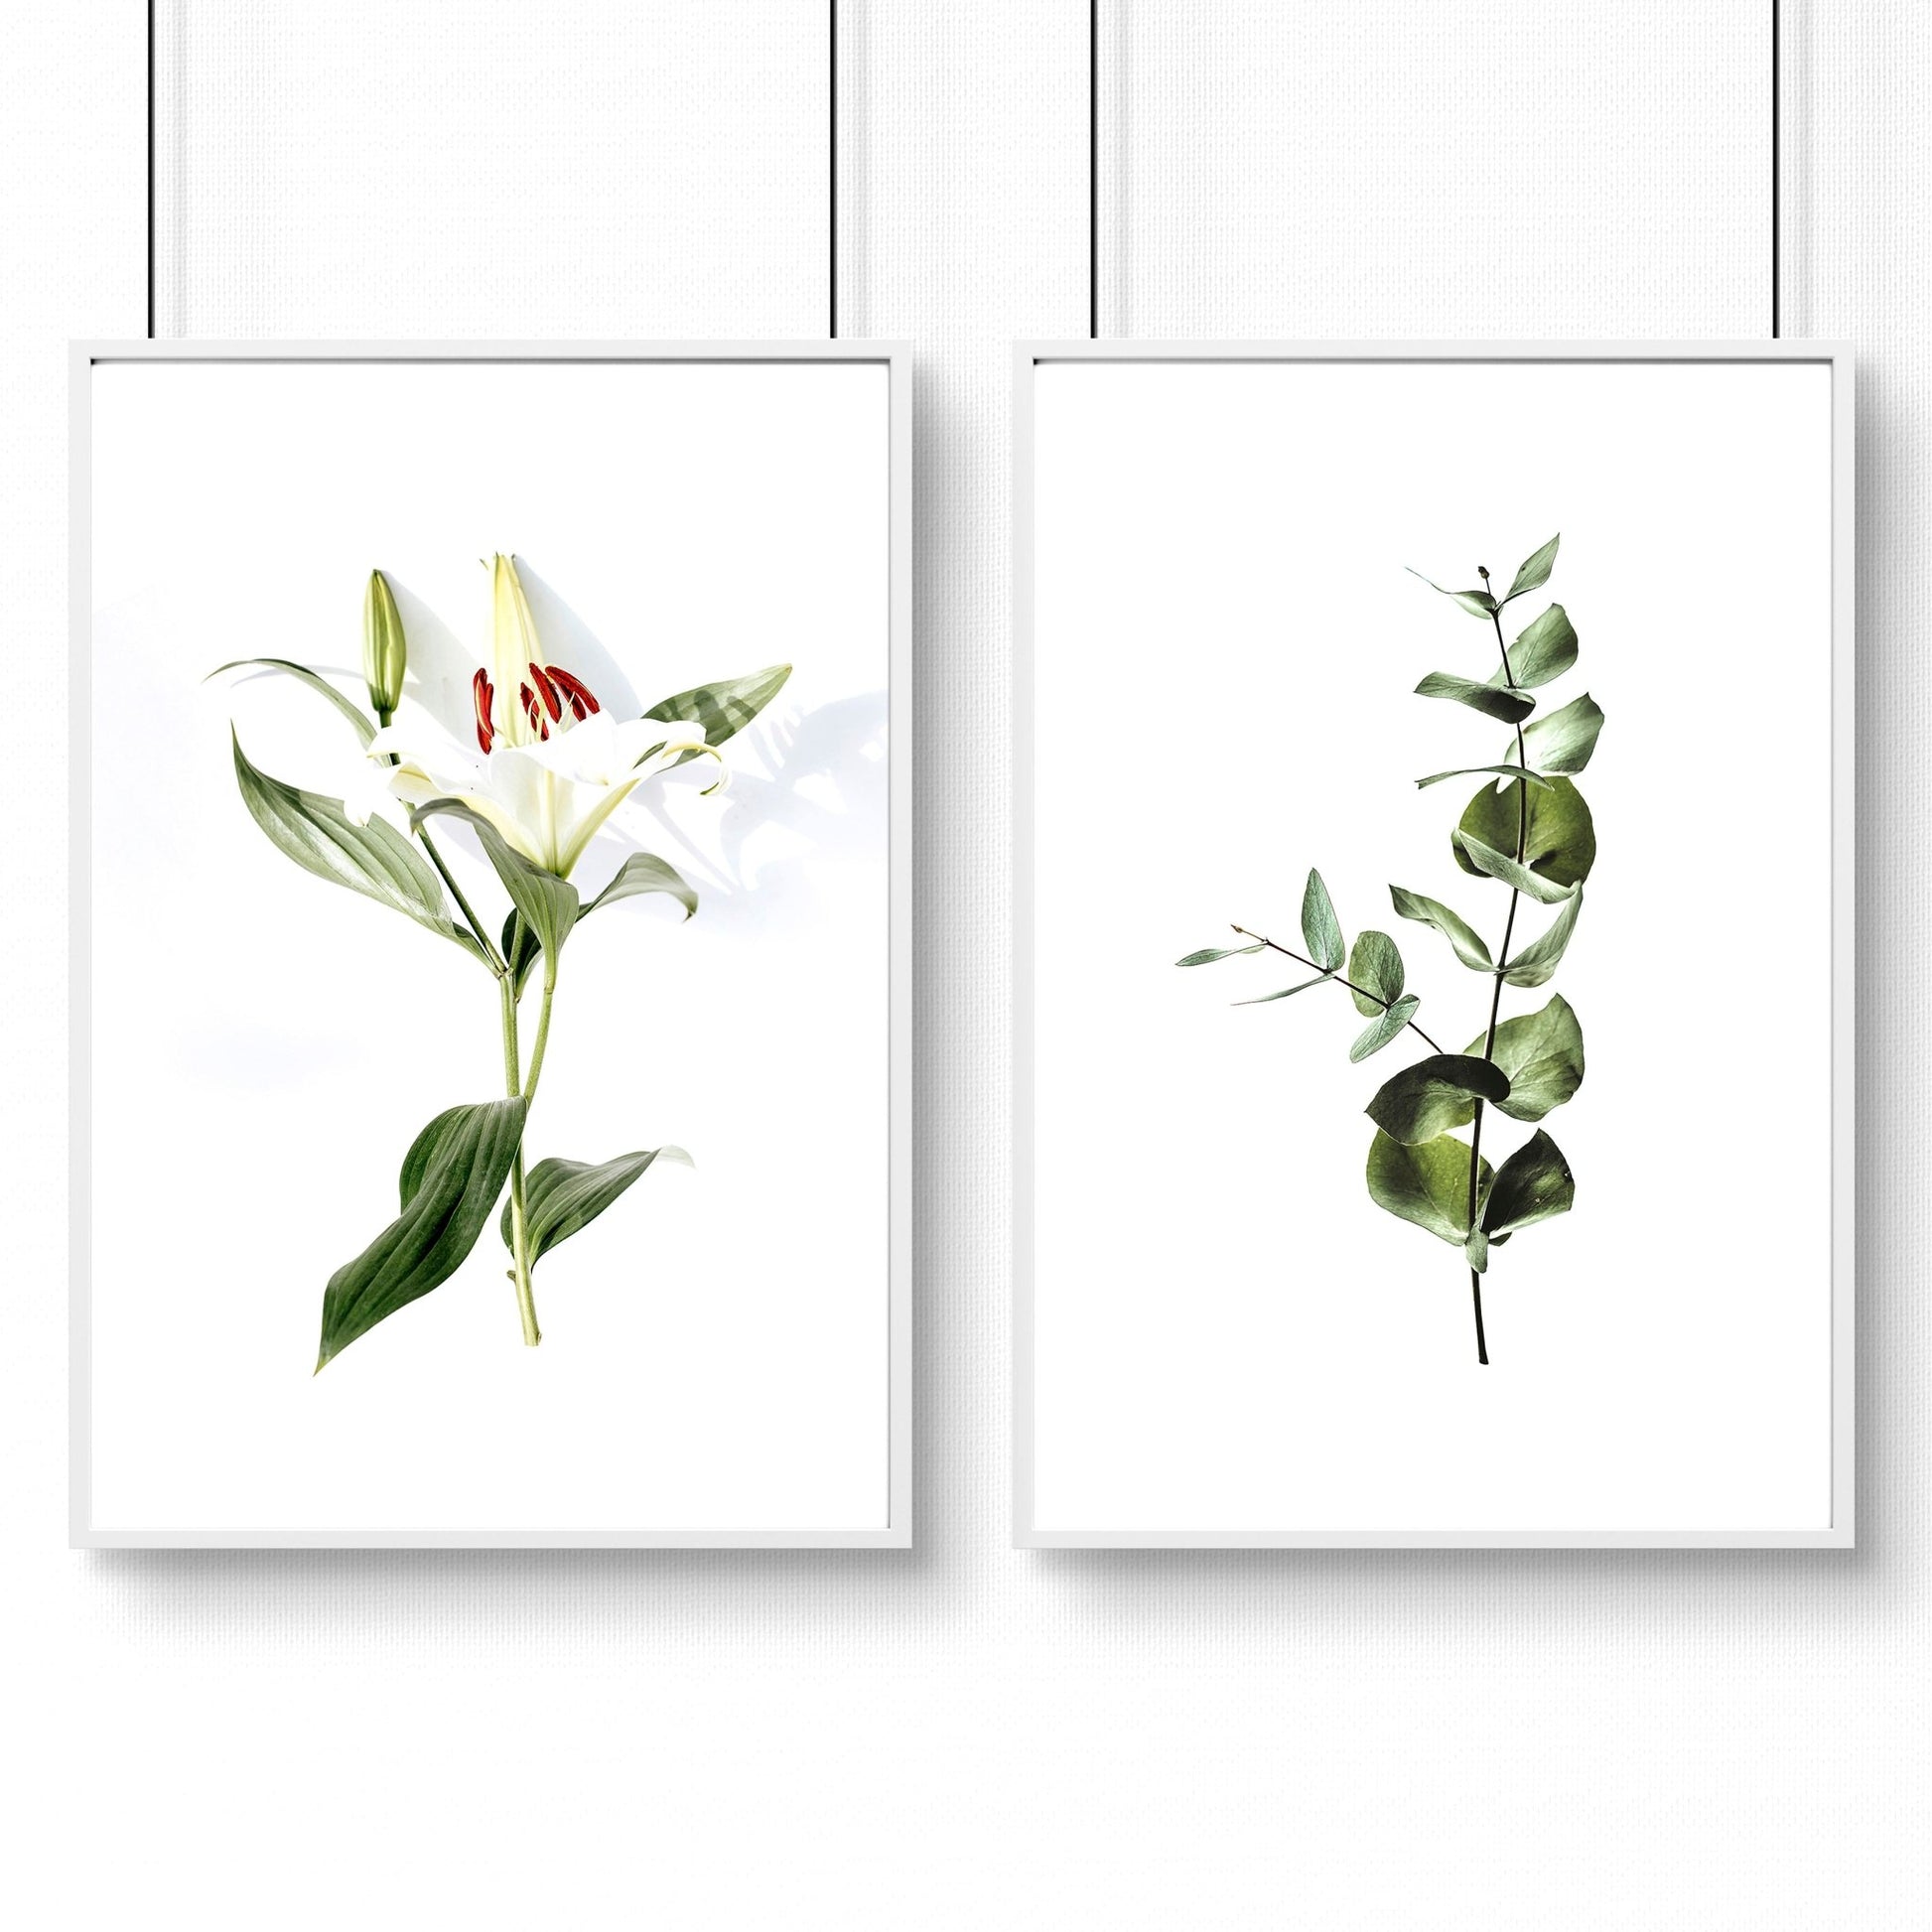 Prints for the kitchen | set of 2 wall art prints - About Wall Art